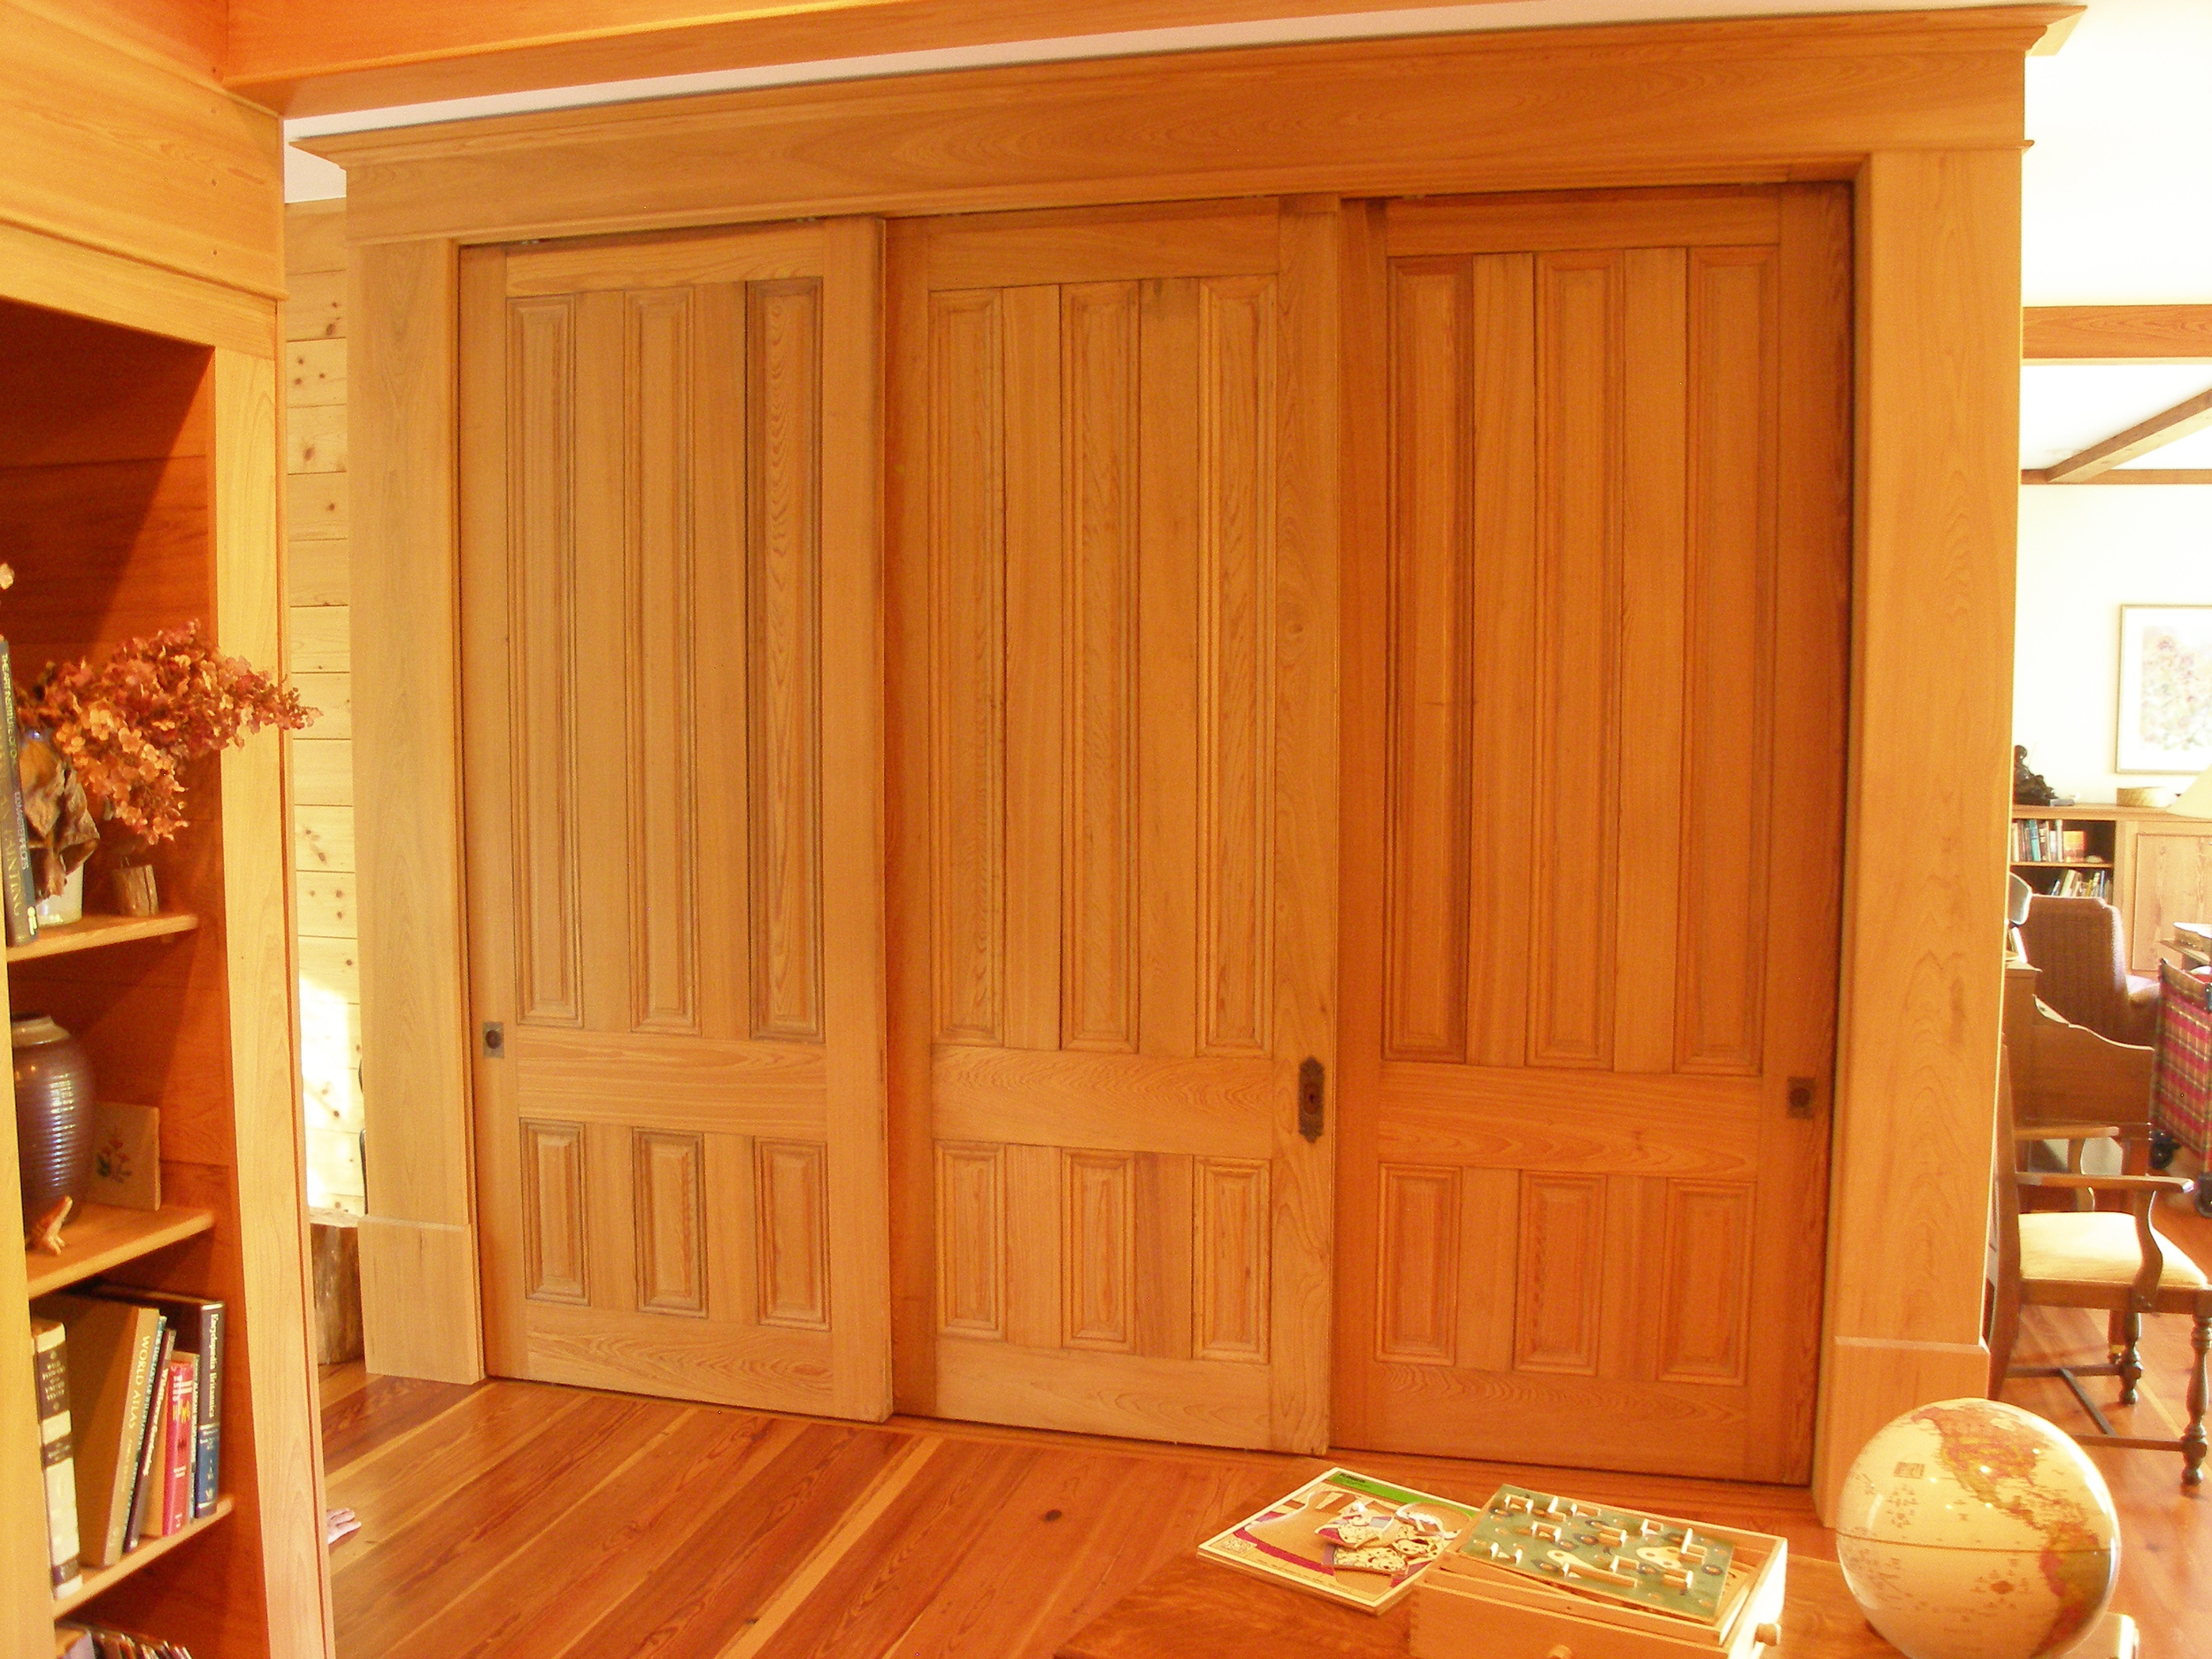 Sliding recycled, cypress doors in closed position.